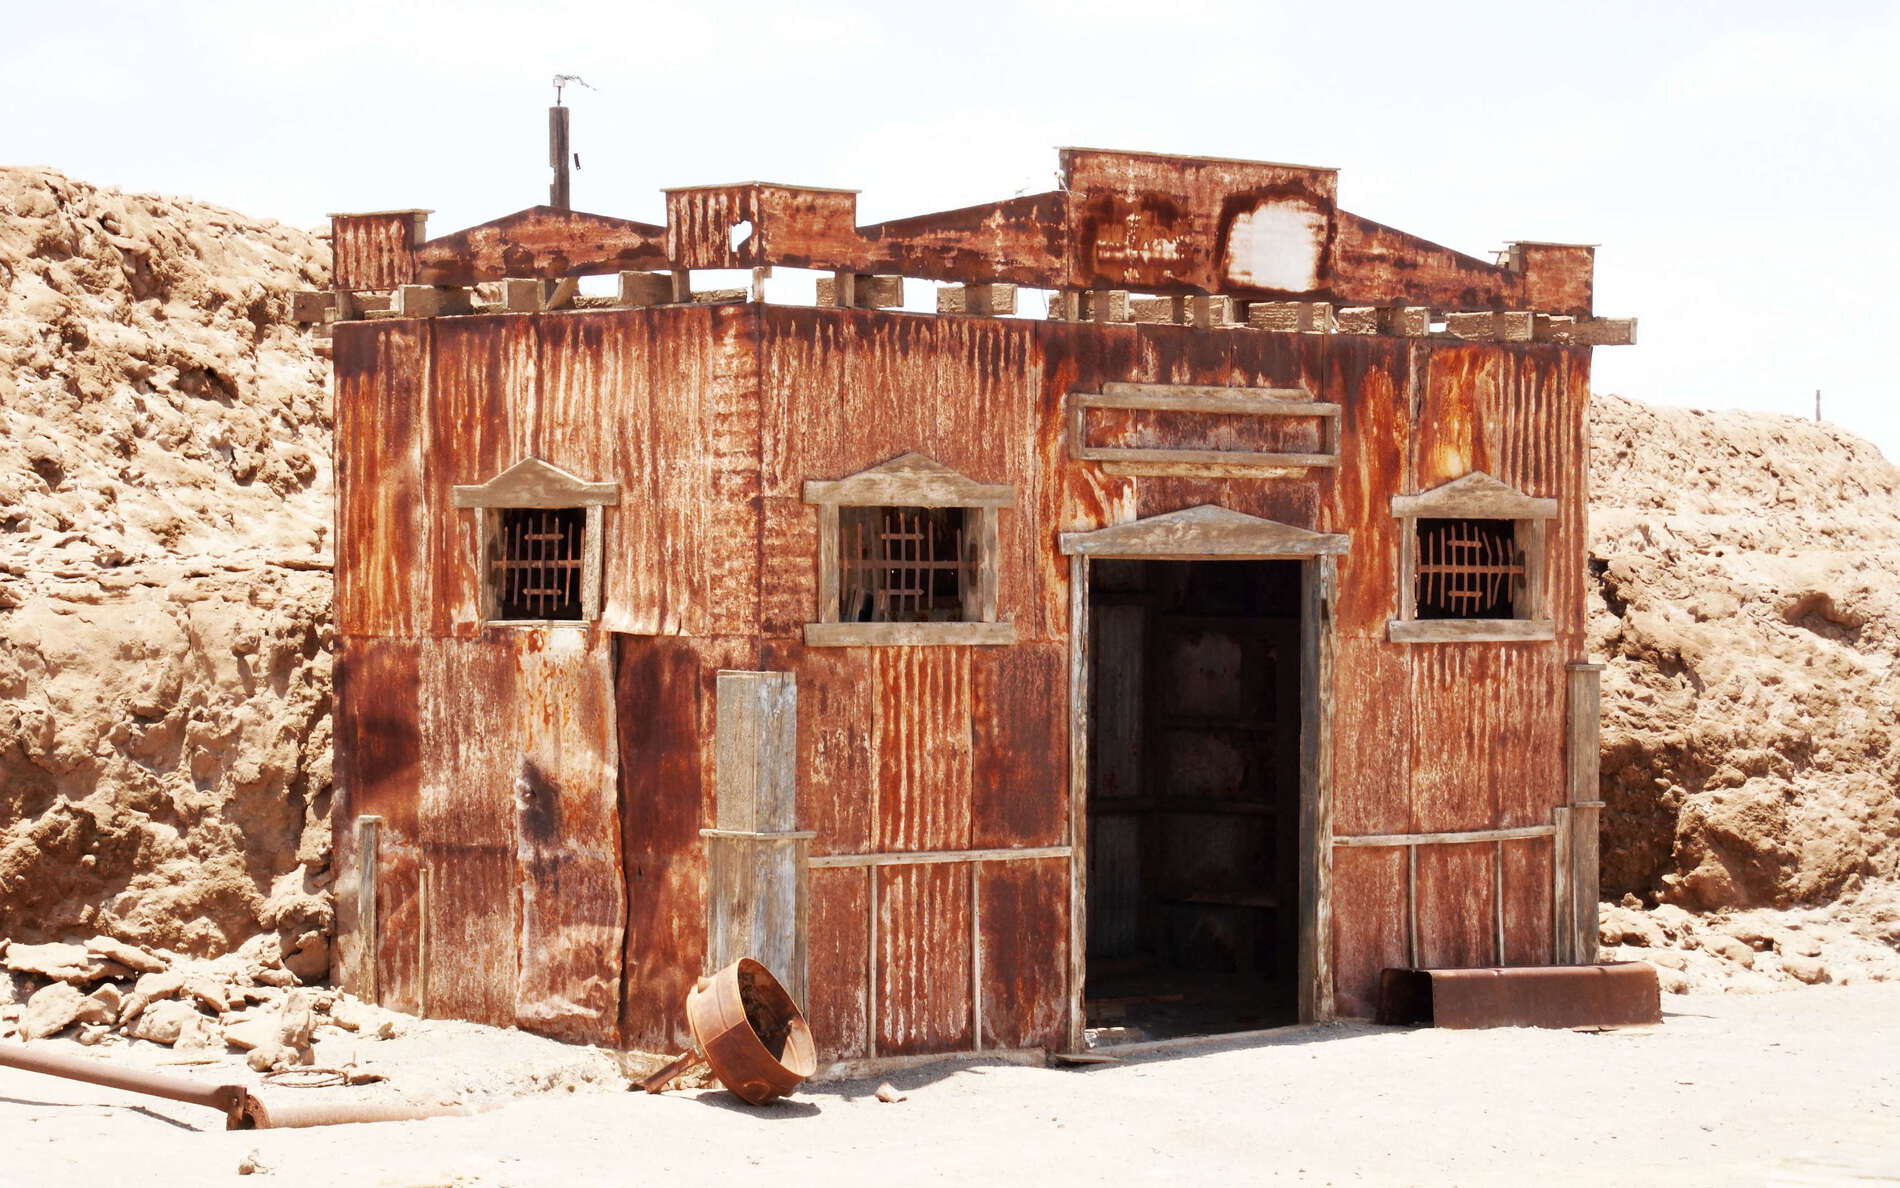 Humberstone | Building in the historic mining town